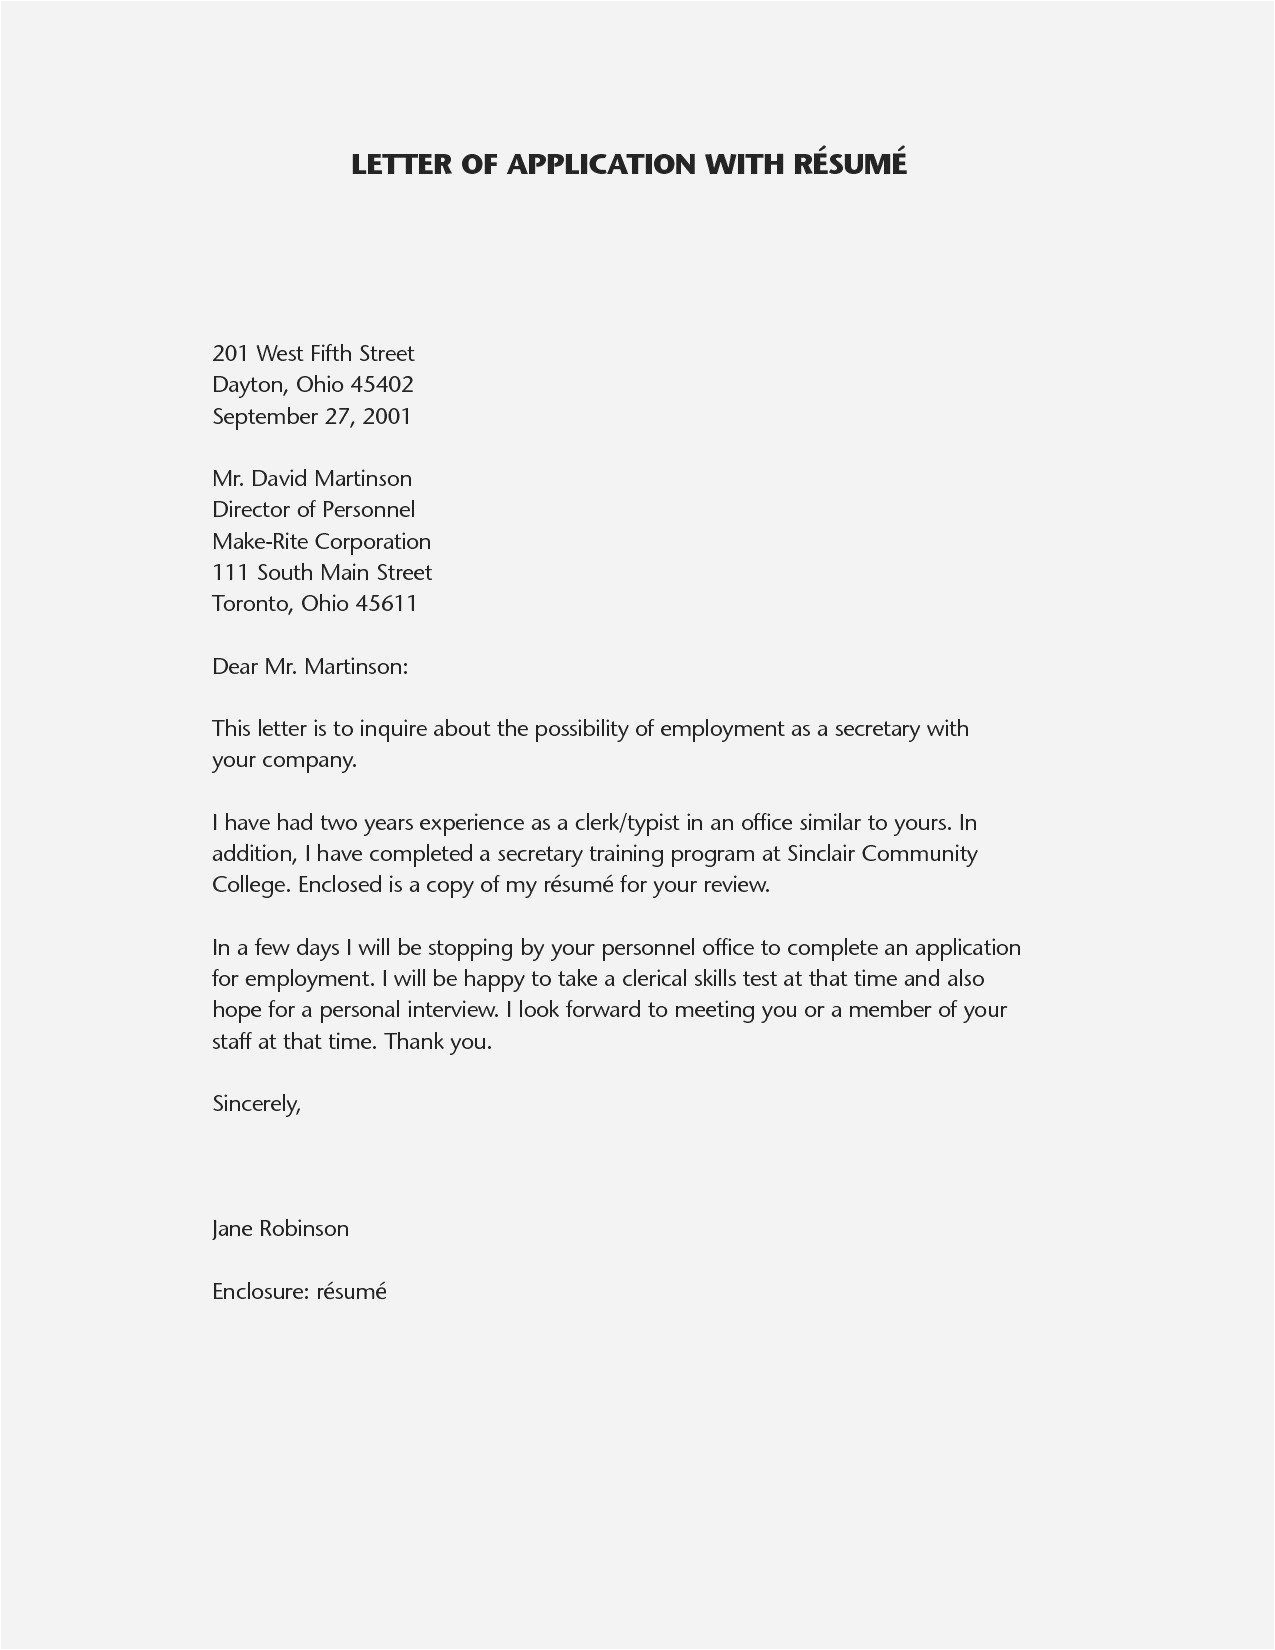 I Ve attached My Resume and Work Samples for Your Review My Resume is attached for Your Review